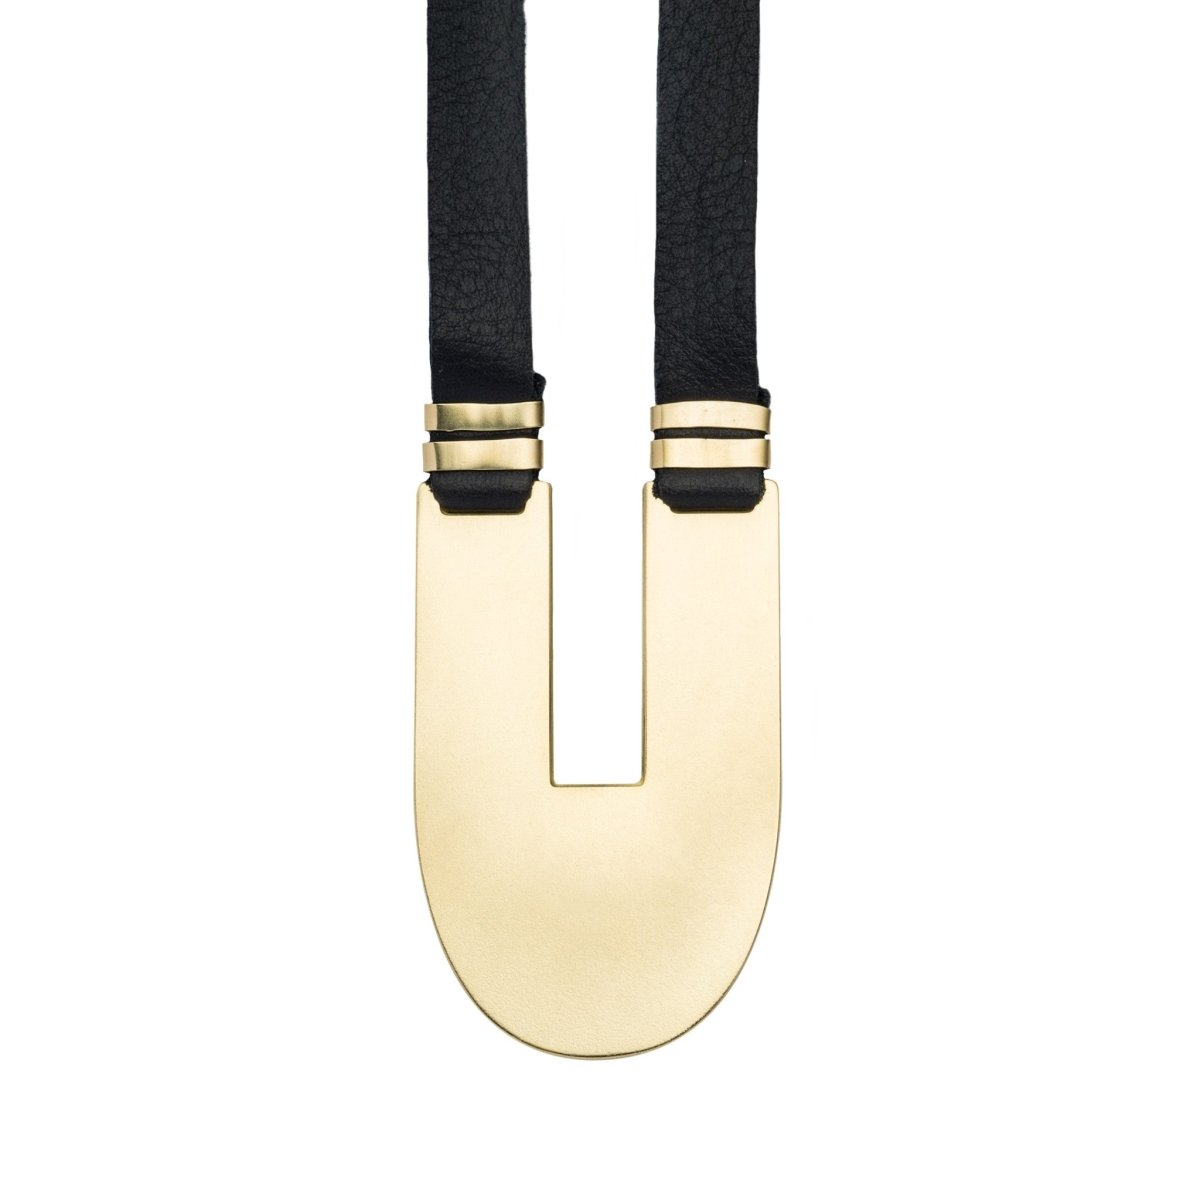 Adjustable, black leather necklace with a sleek, oblong, polished brass statement pendant and brass tubing accents. Hand-crafted in Portland, Oregon.